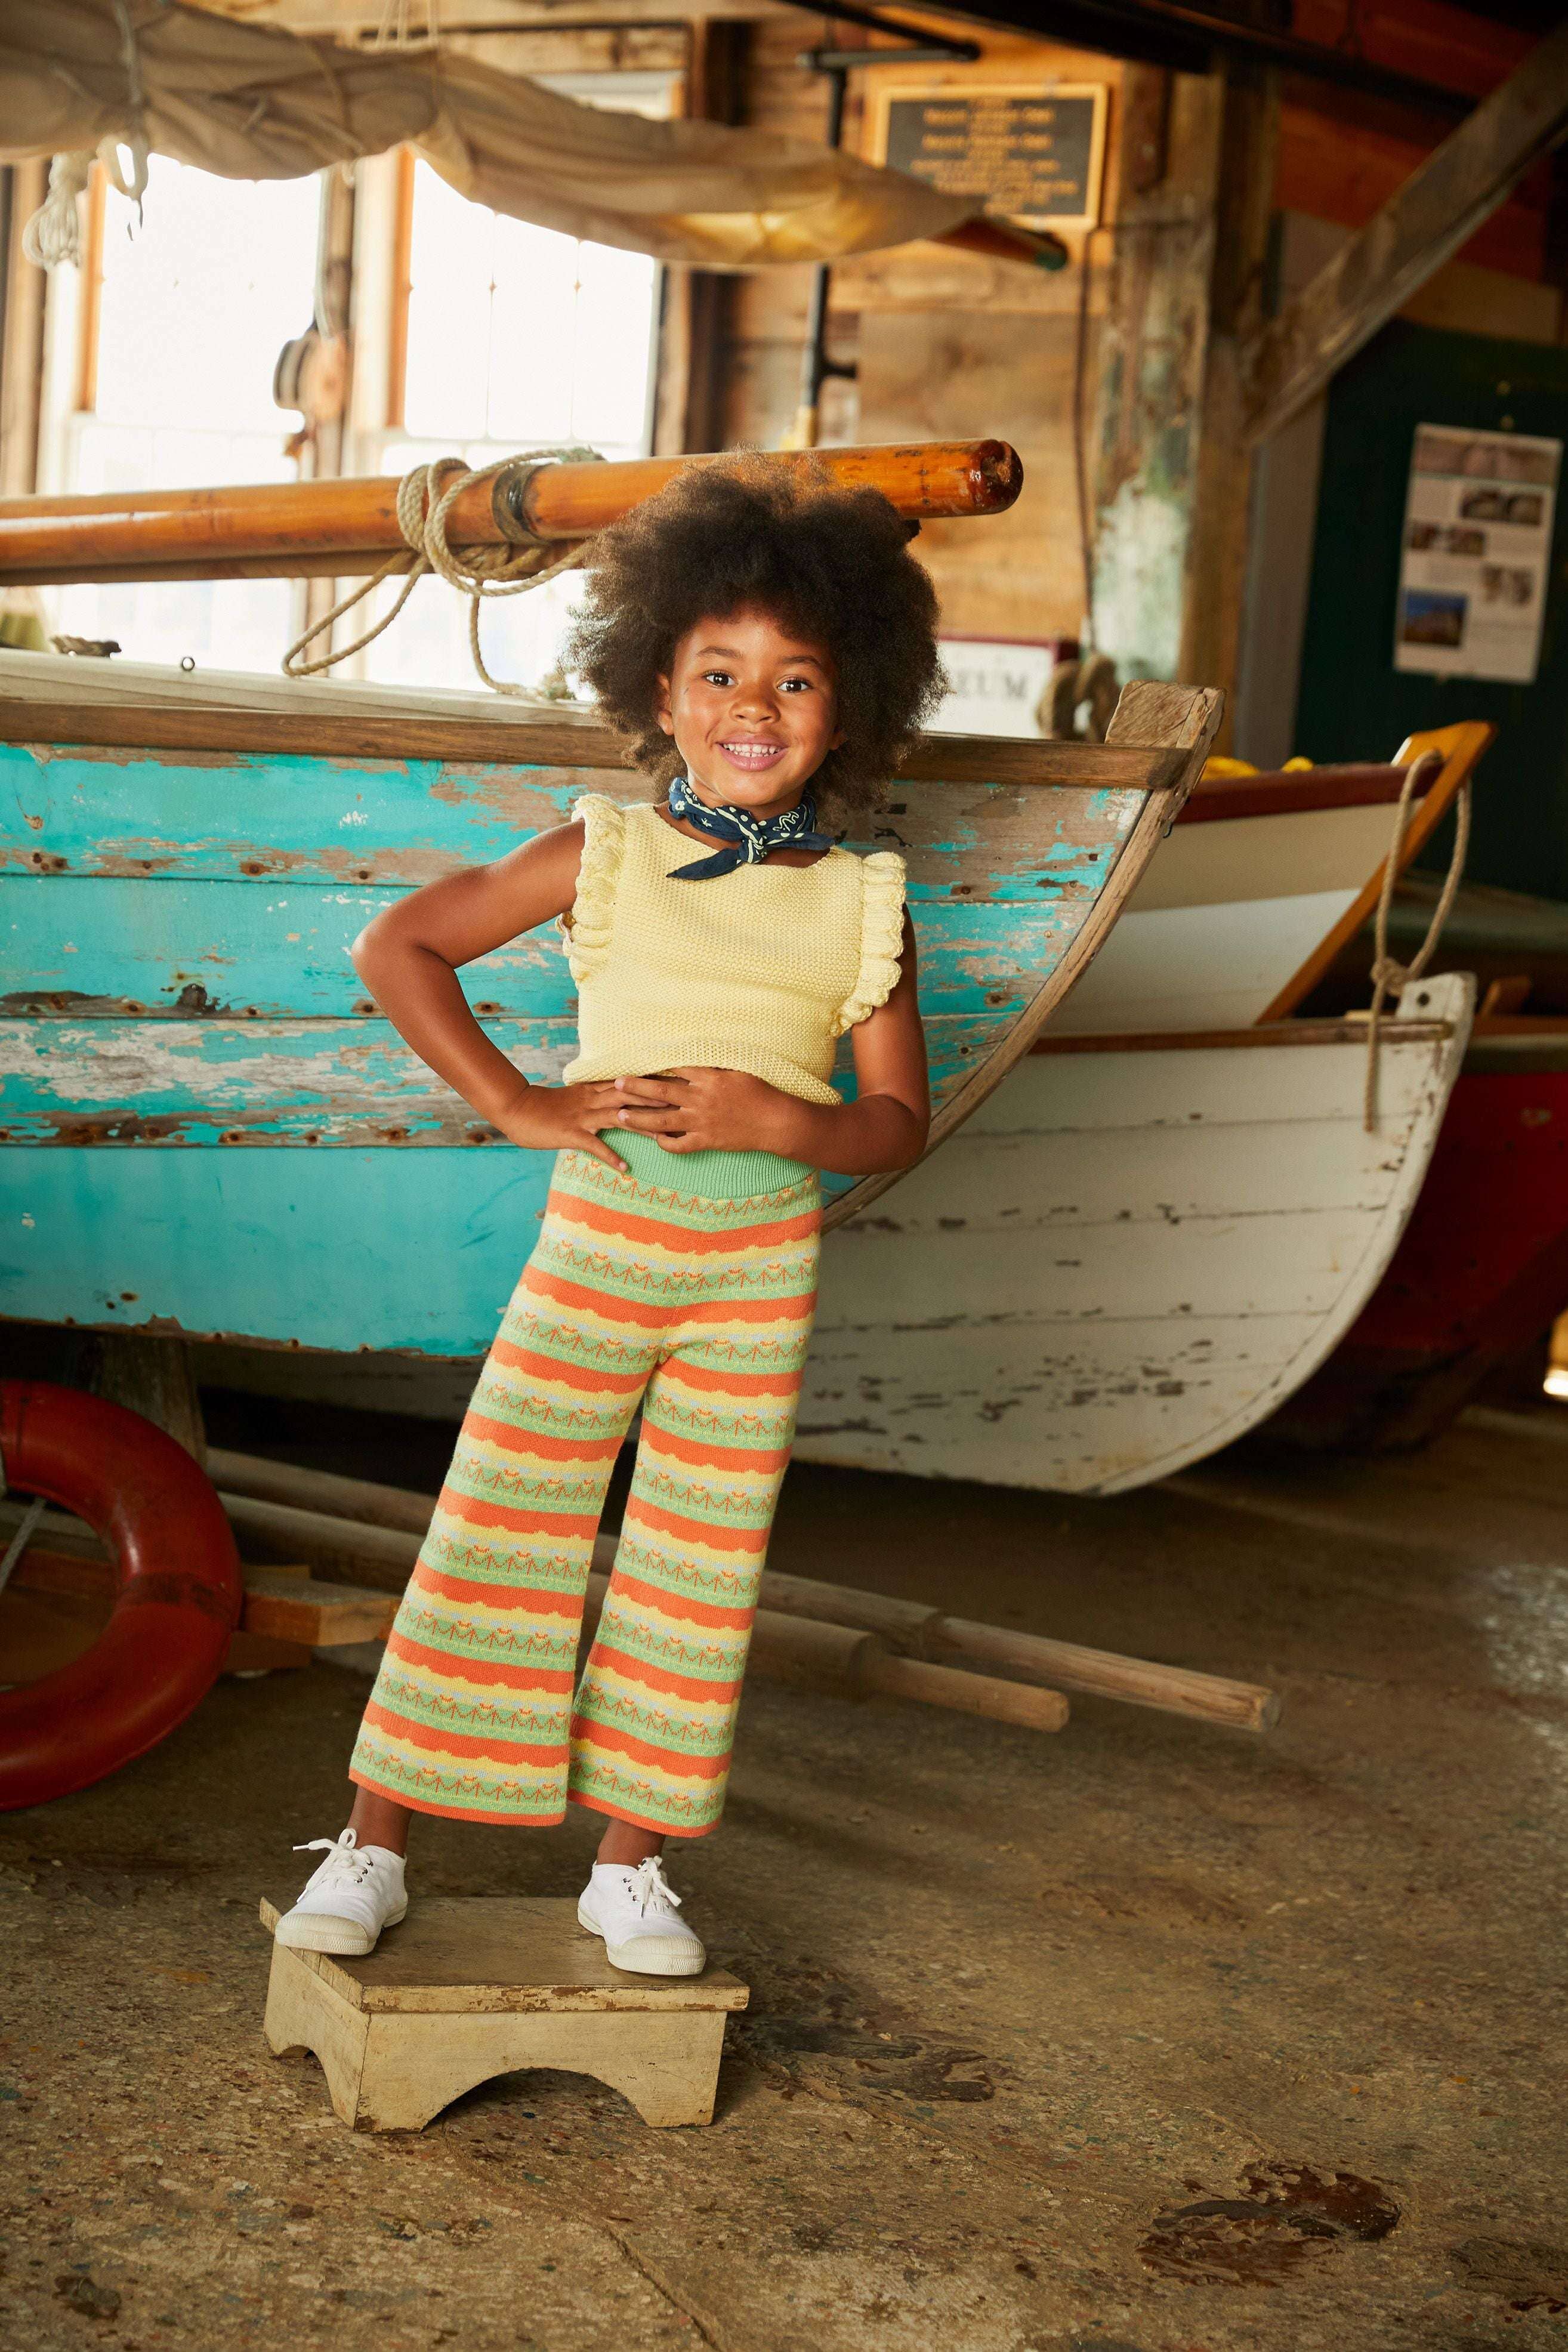 Misha and Puff, Fairground Pants in Melon – CouCou